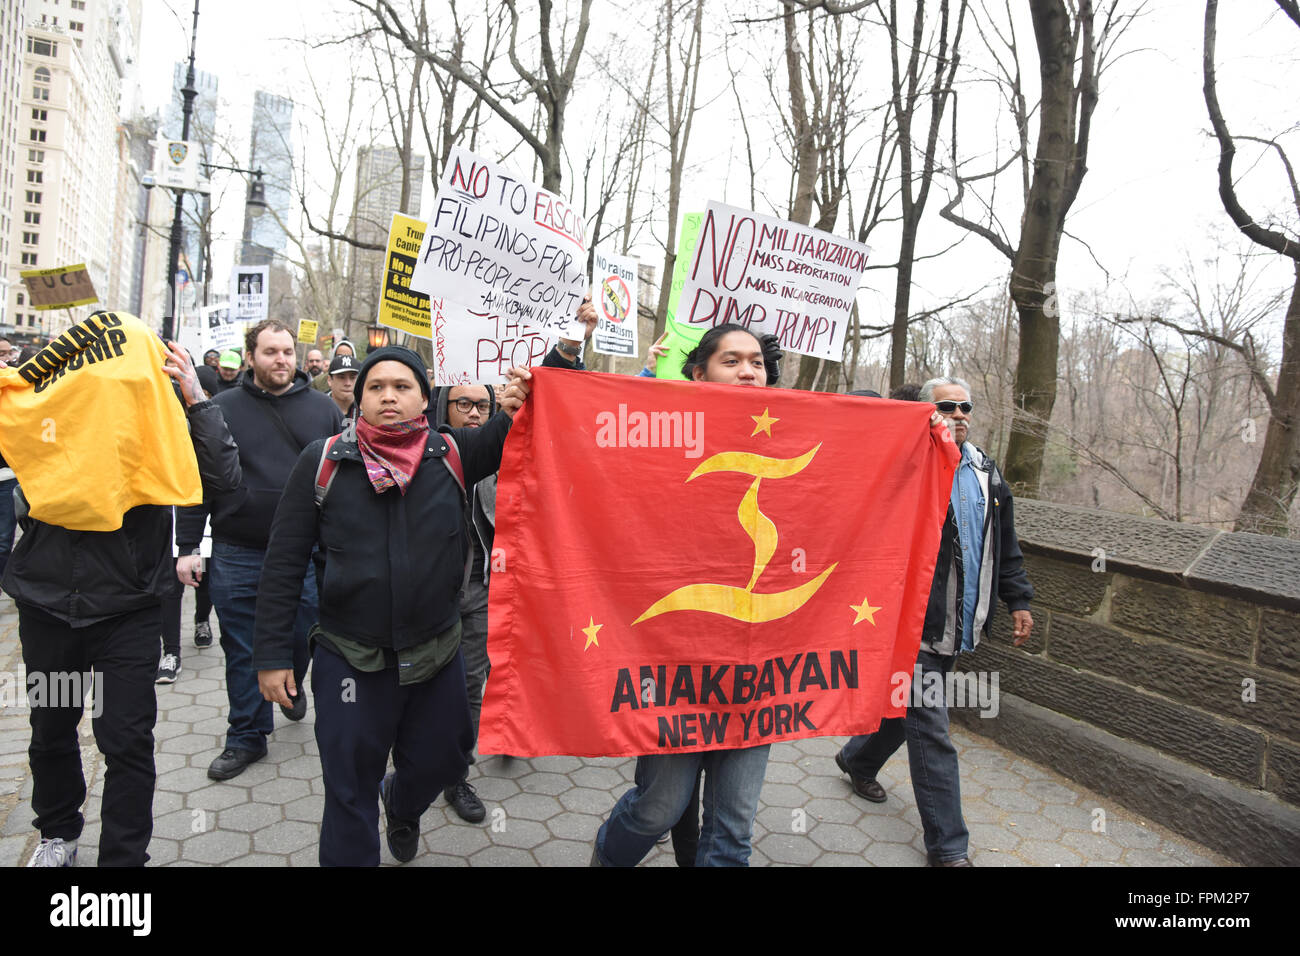 New York, USA, 19 March 2016: Anakbayan flag carried along 59th Street during NYC rally against Republican front runner Donald Trump Credit:  Andrew Katz/Alamy Live News Stock Photo